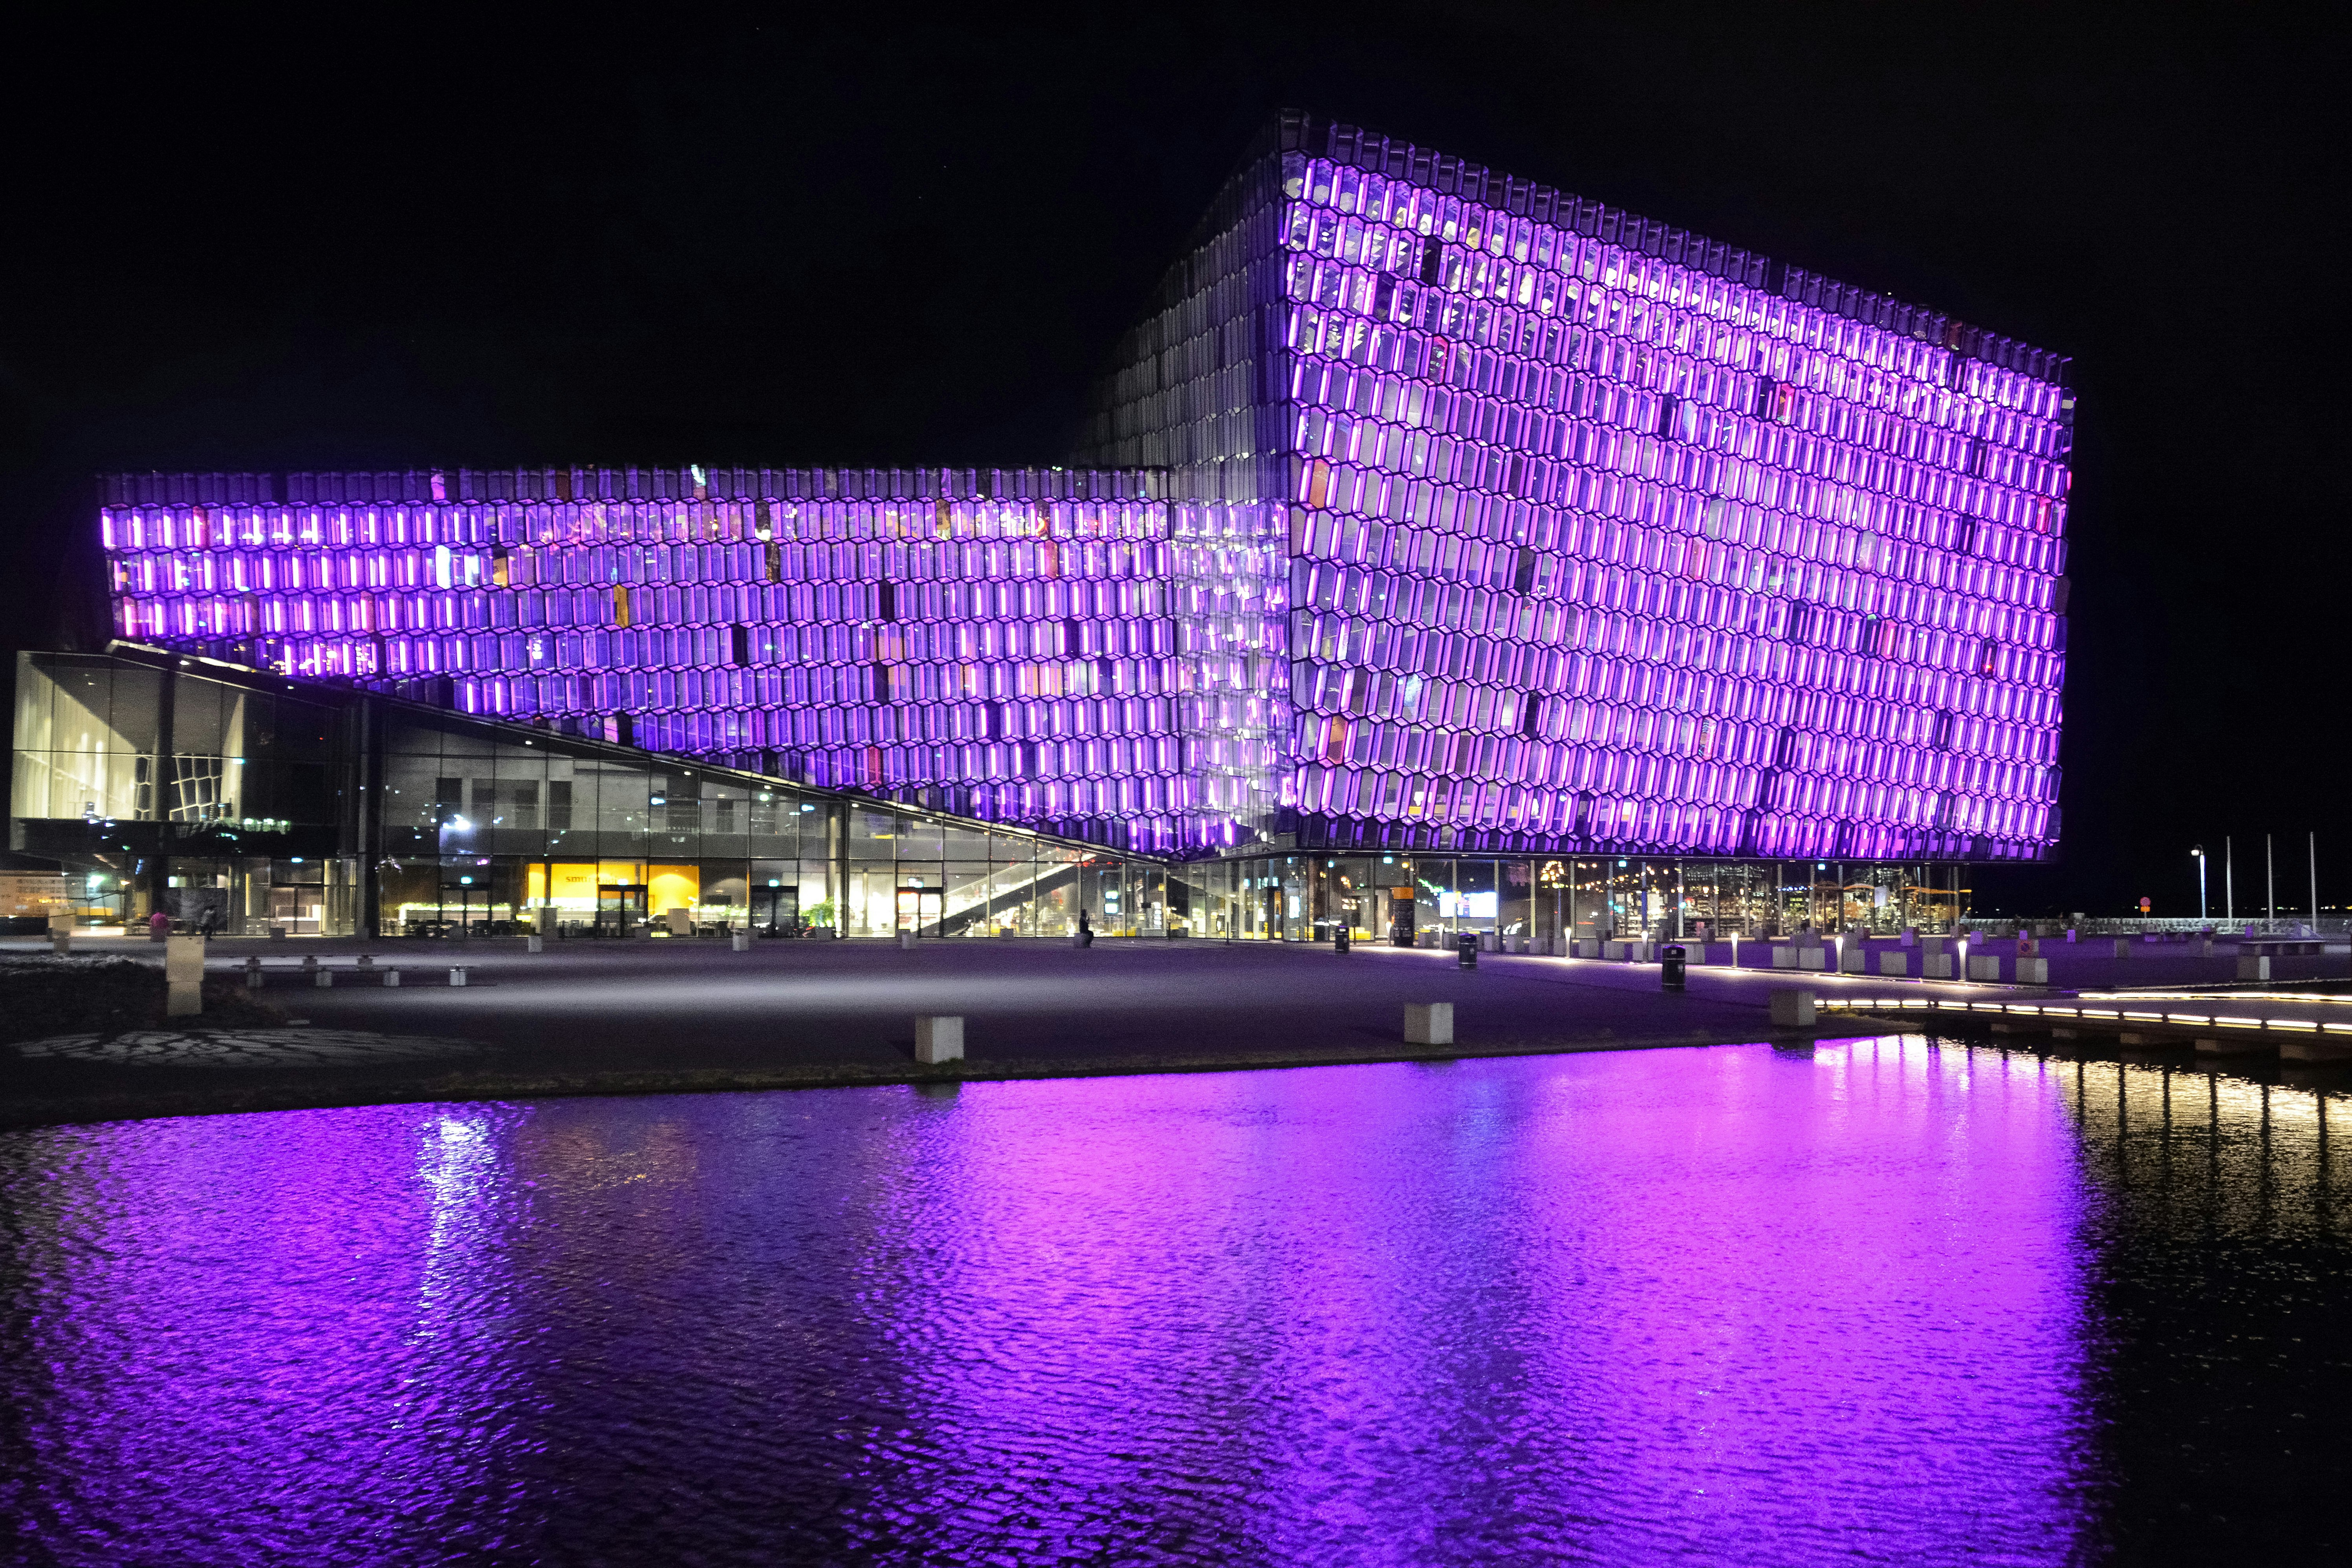 purple and black building near body of water during night time